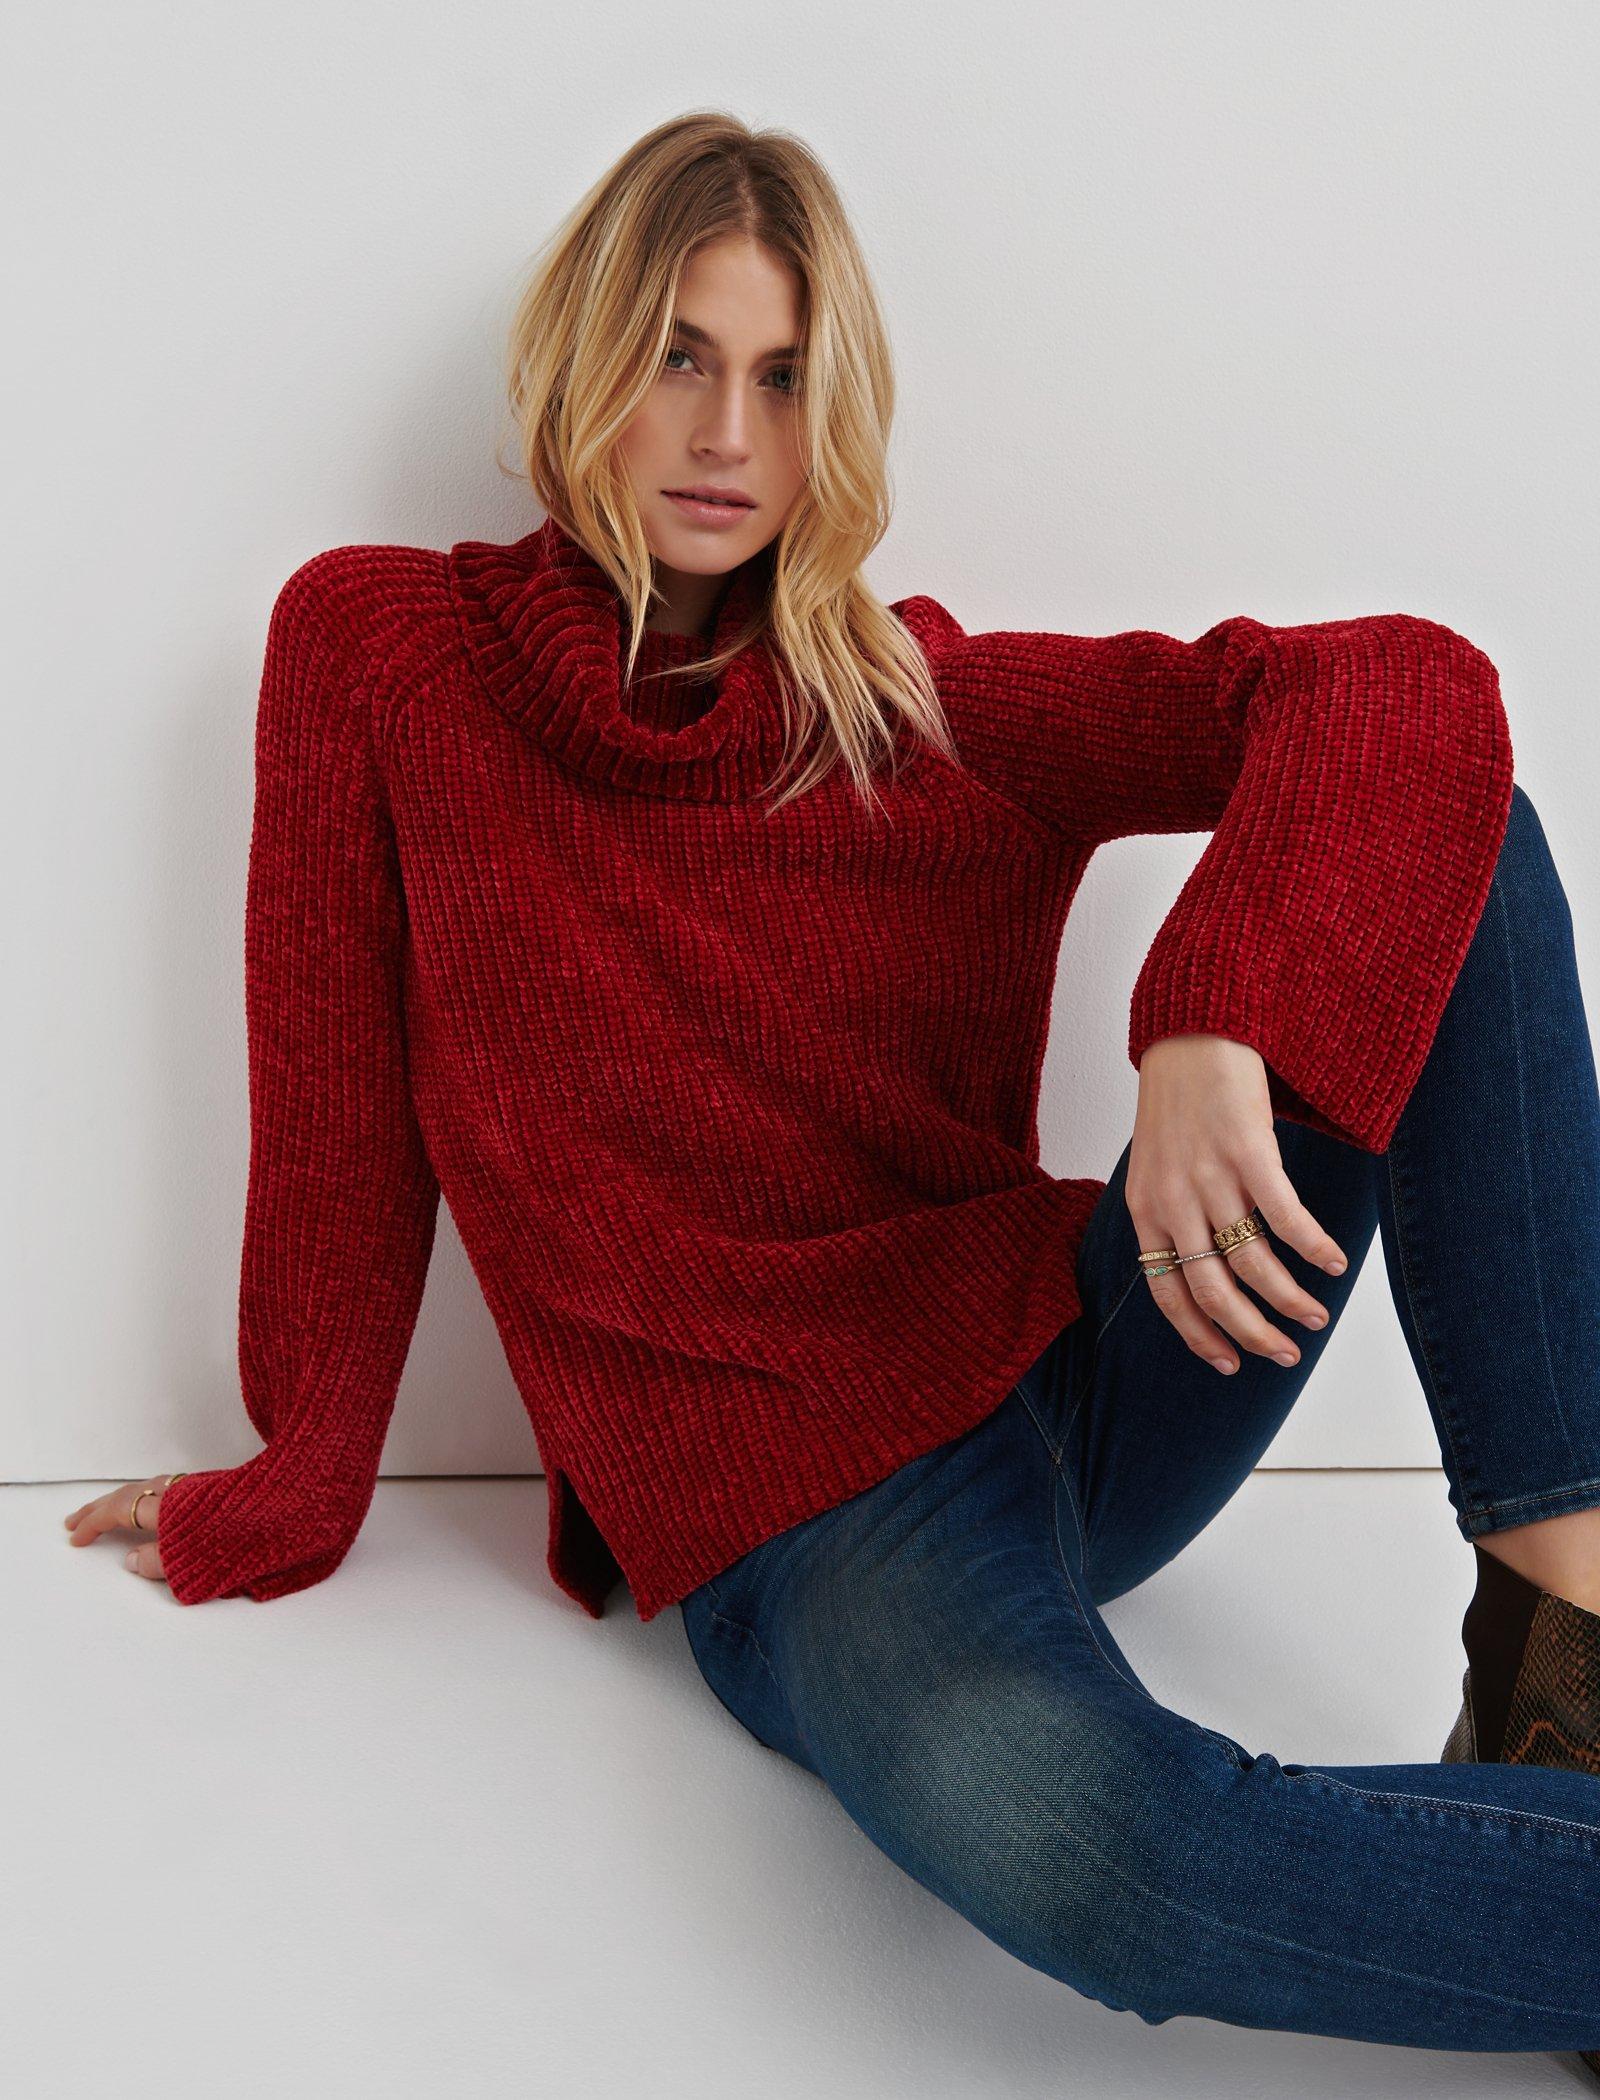 red cowl neck sweater